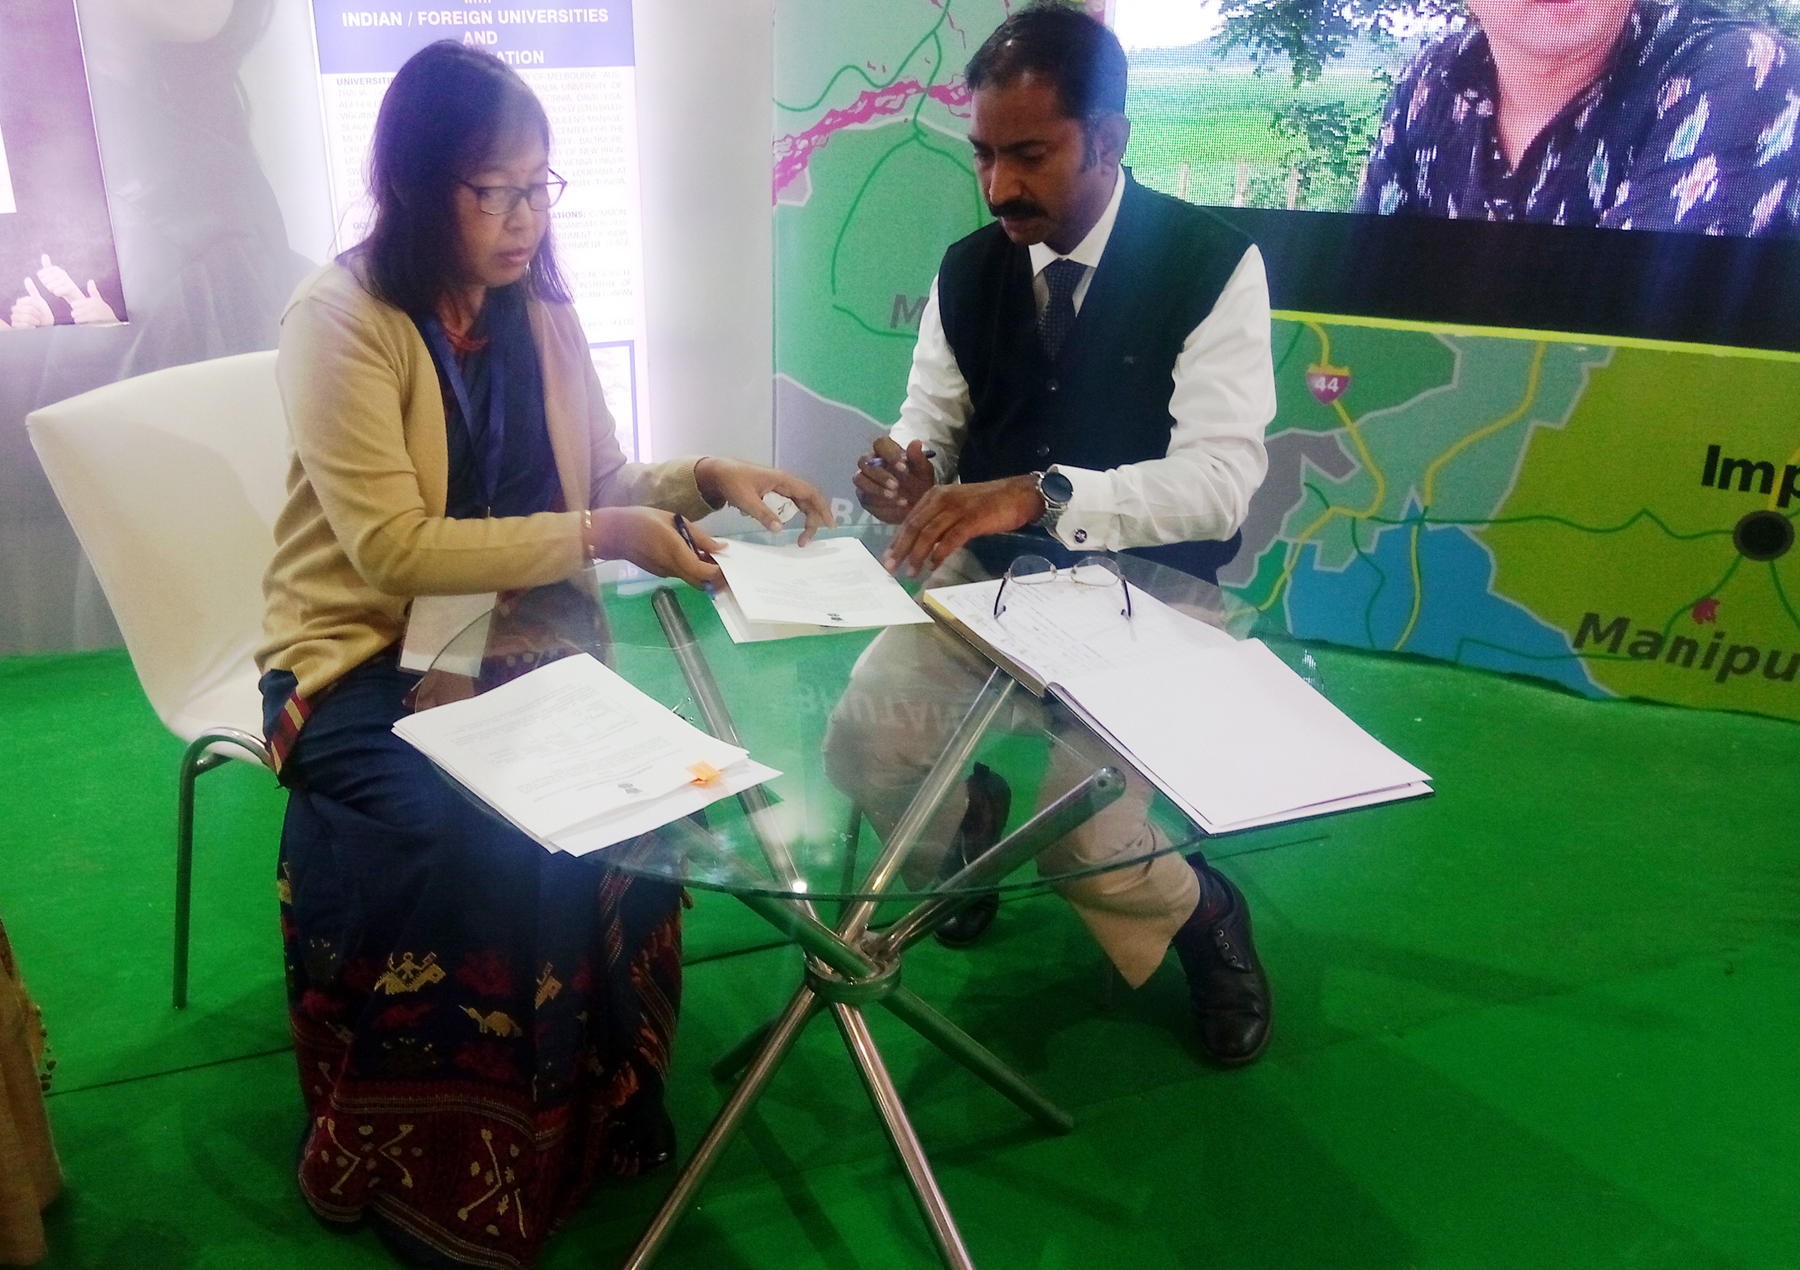 Smti Krishna Gohain (IAS Secretary, Higher Education Department, Assam) and Mr. Amitab Saxena (Director, AISECT) signing the MoU for setting up Dr. V. Raman University in the State